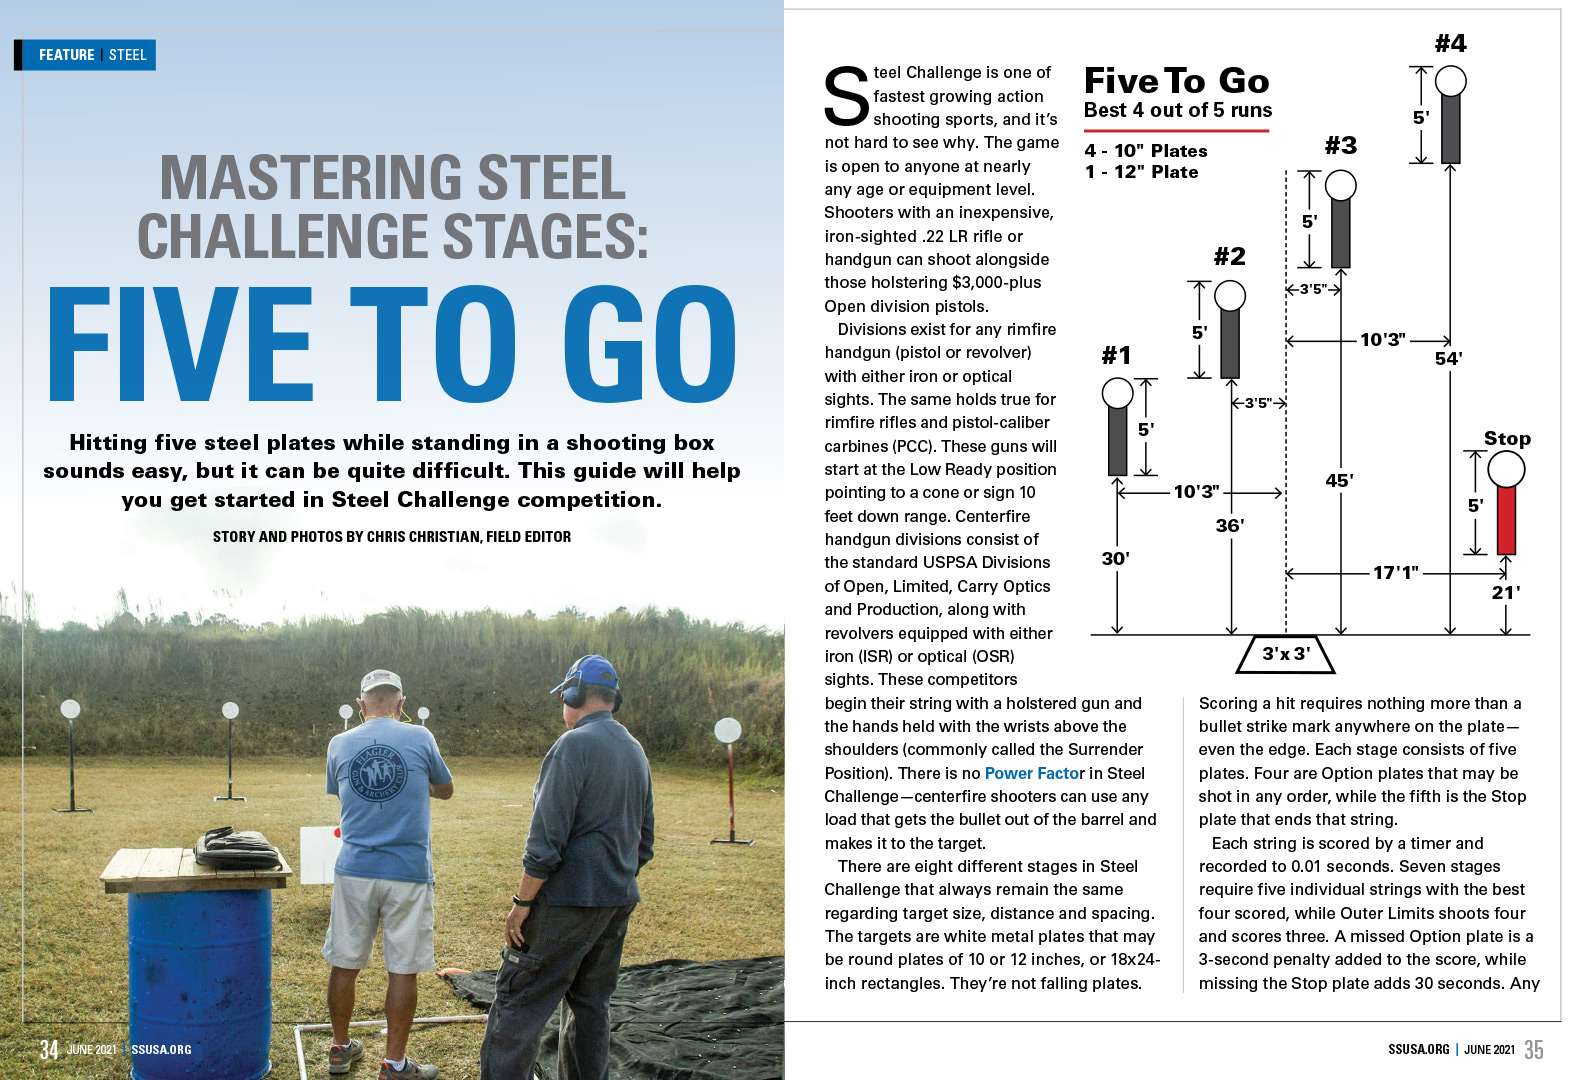 Steel Challenge Stage Guide: Five To Go